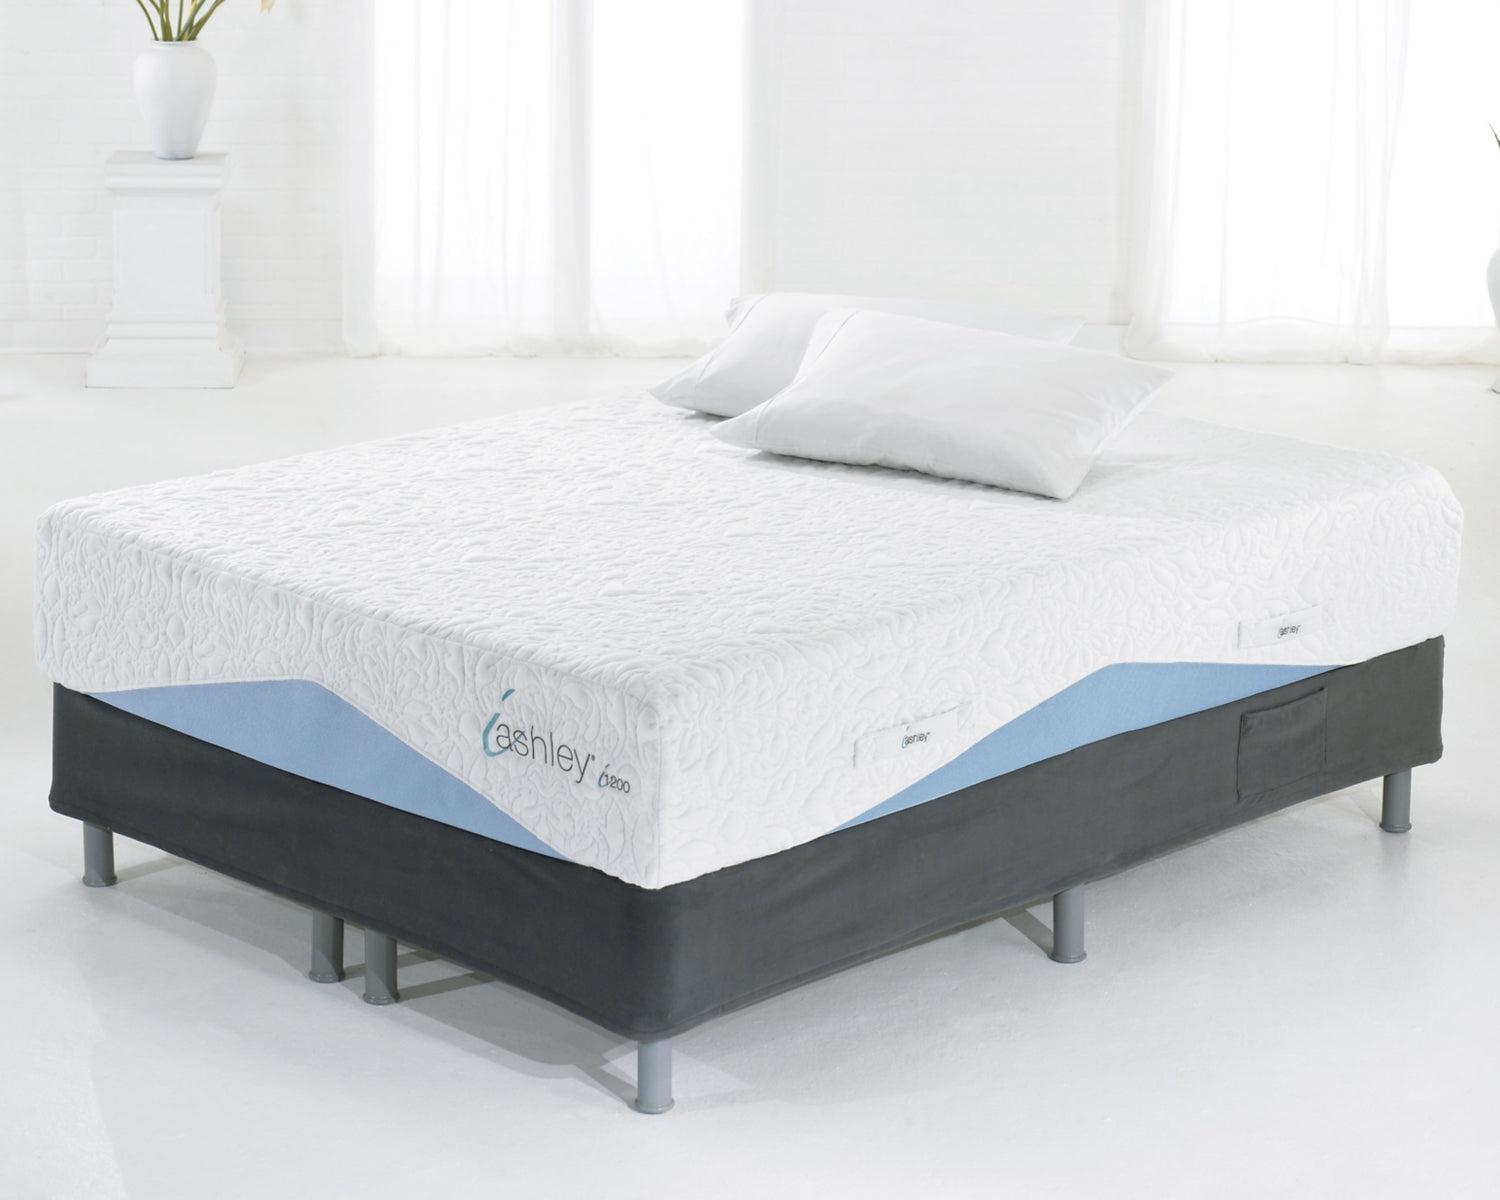 12 Inch Chime Elite King Adjustable Base with Mattress